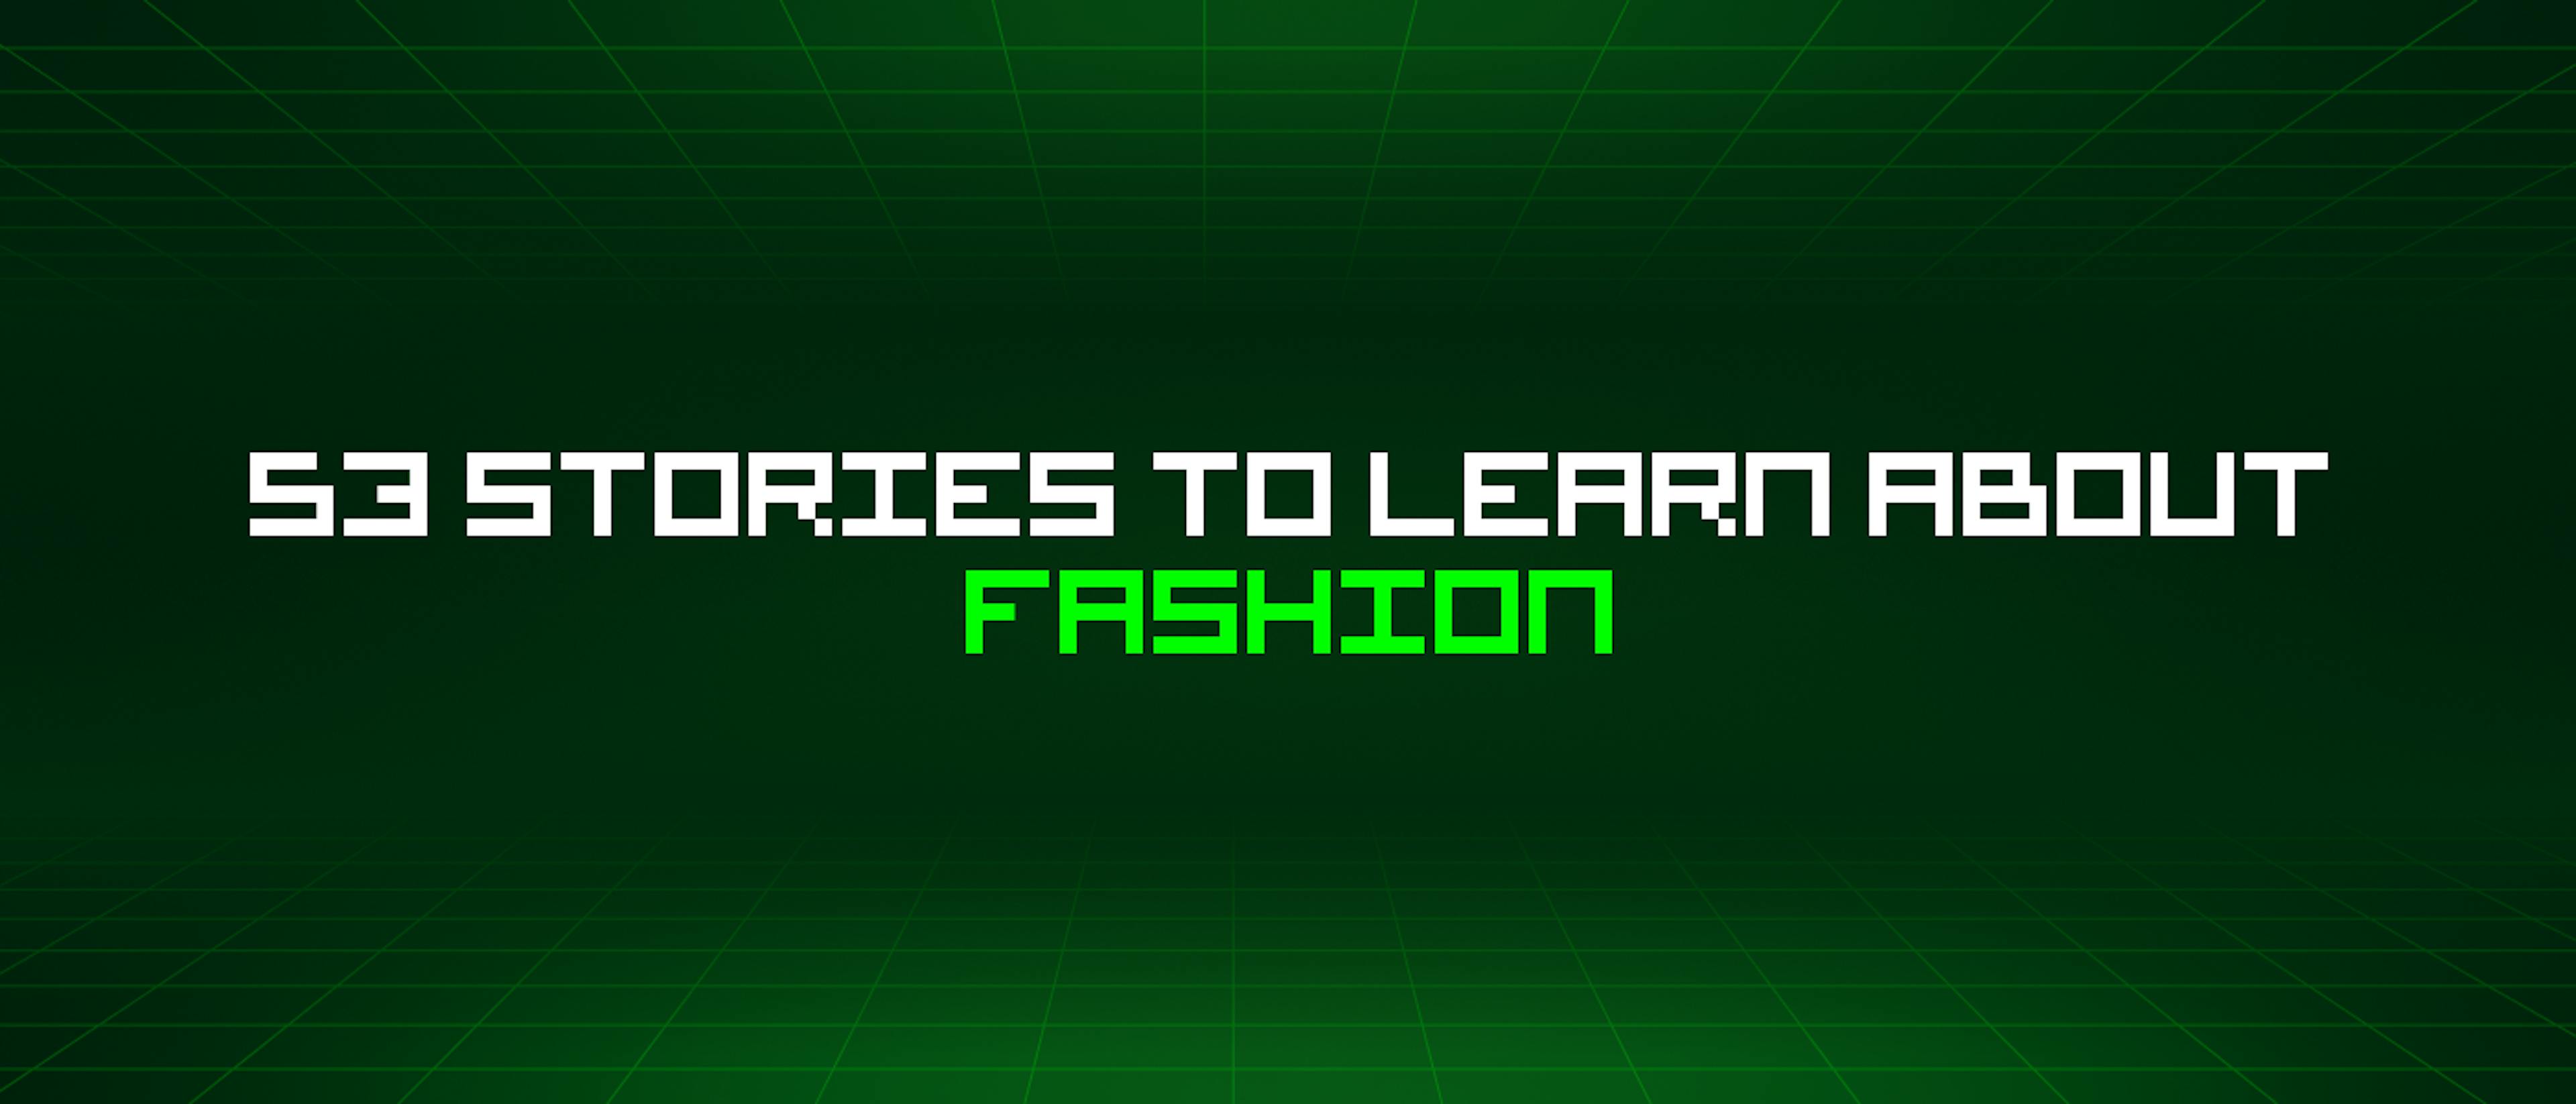 featured image - 53 Stories To Learn About Fashion